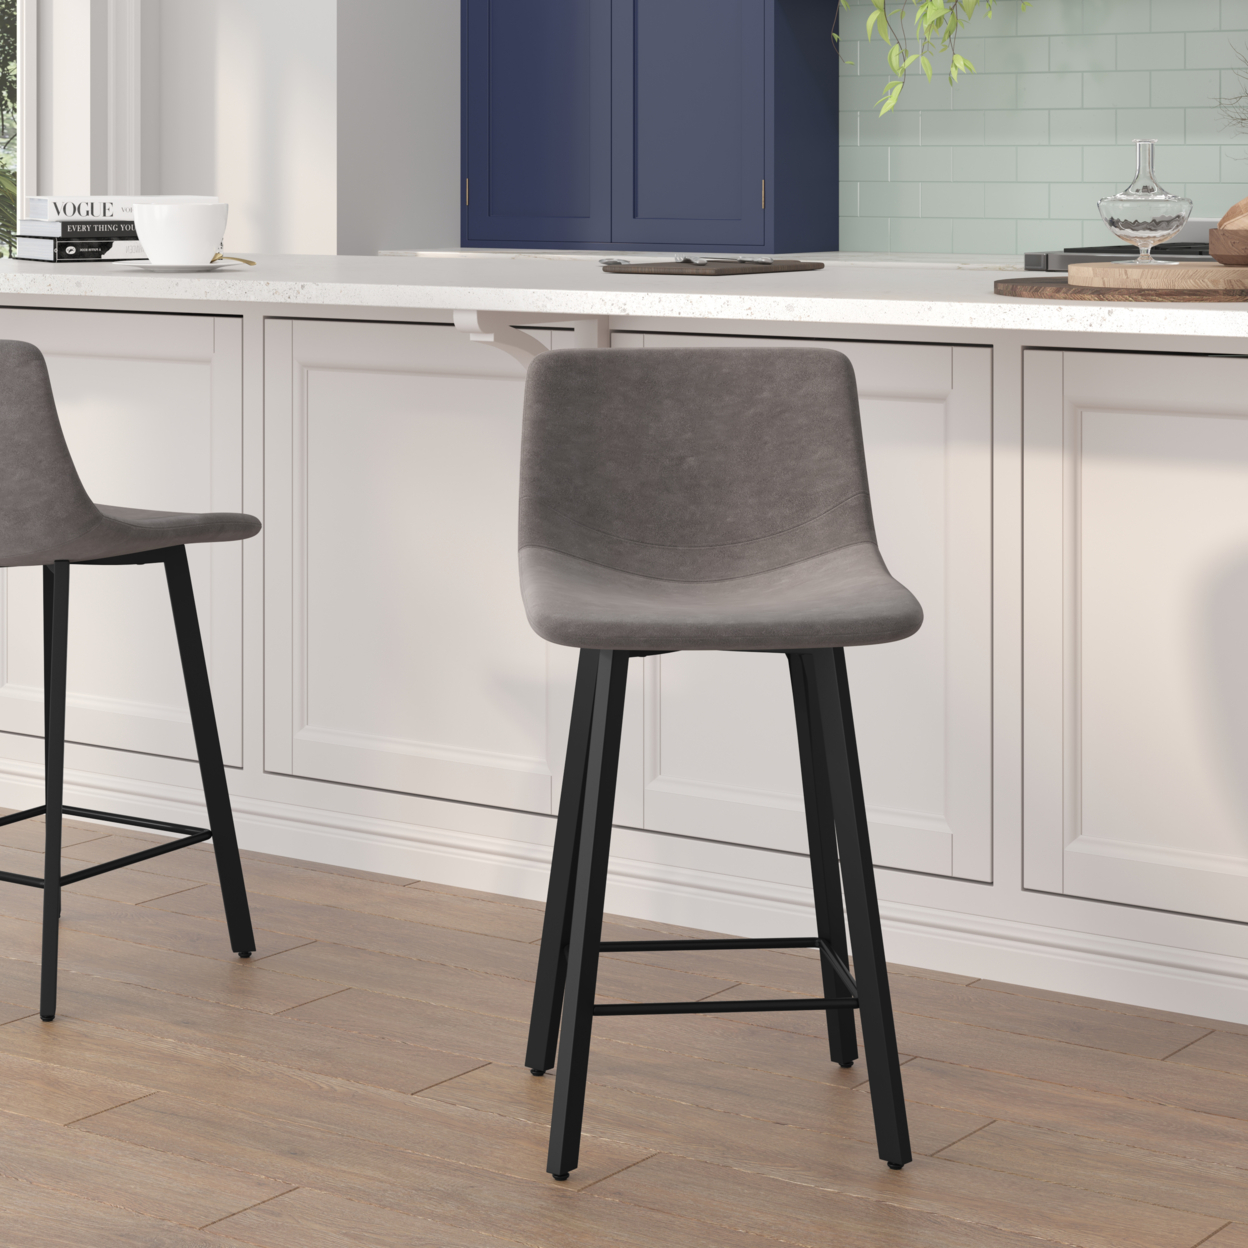 2 Piece 24 Inch Stool, Gray Leather, Metal Angled Legs